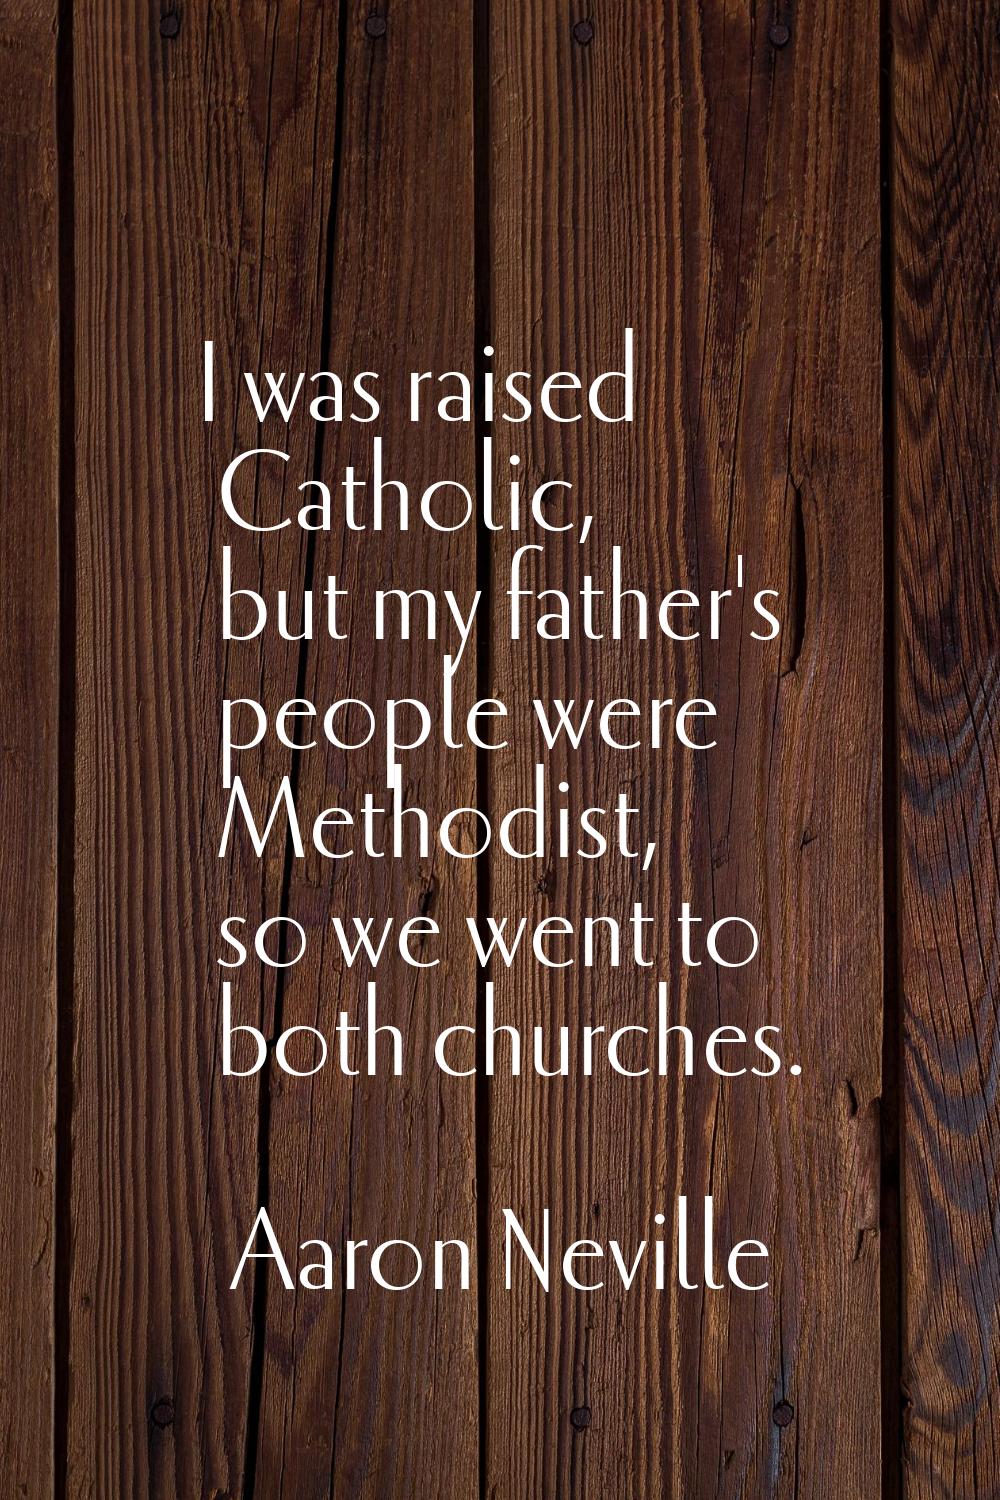 I was raised Catholic, but my father's people were Methodist, so we went to both churches.